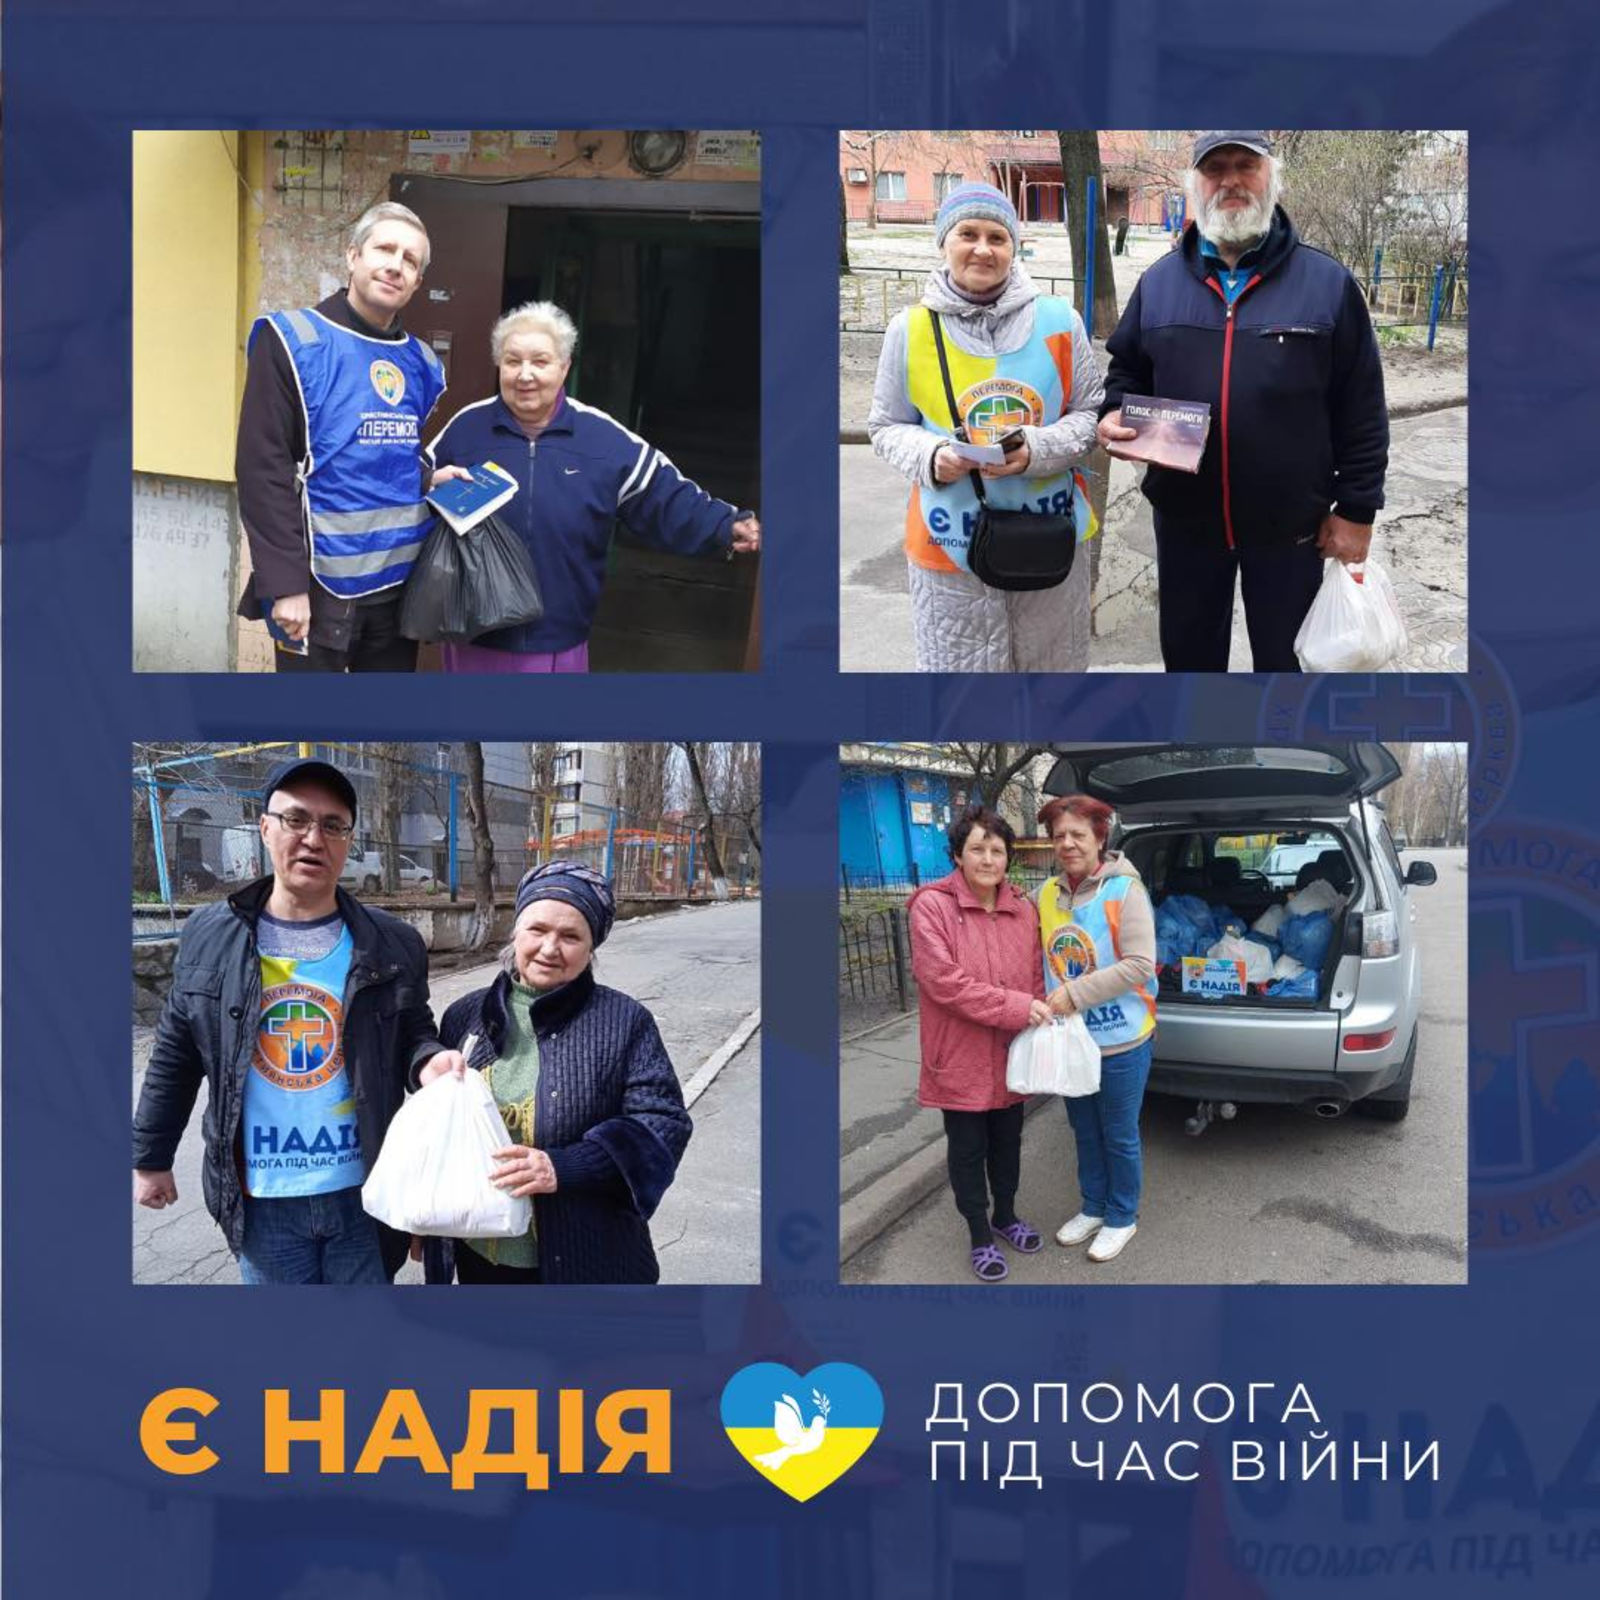 THERE IS HOPE - help during wartime" project by Victory Christian Church in Kyiv and Kyiv oblast.